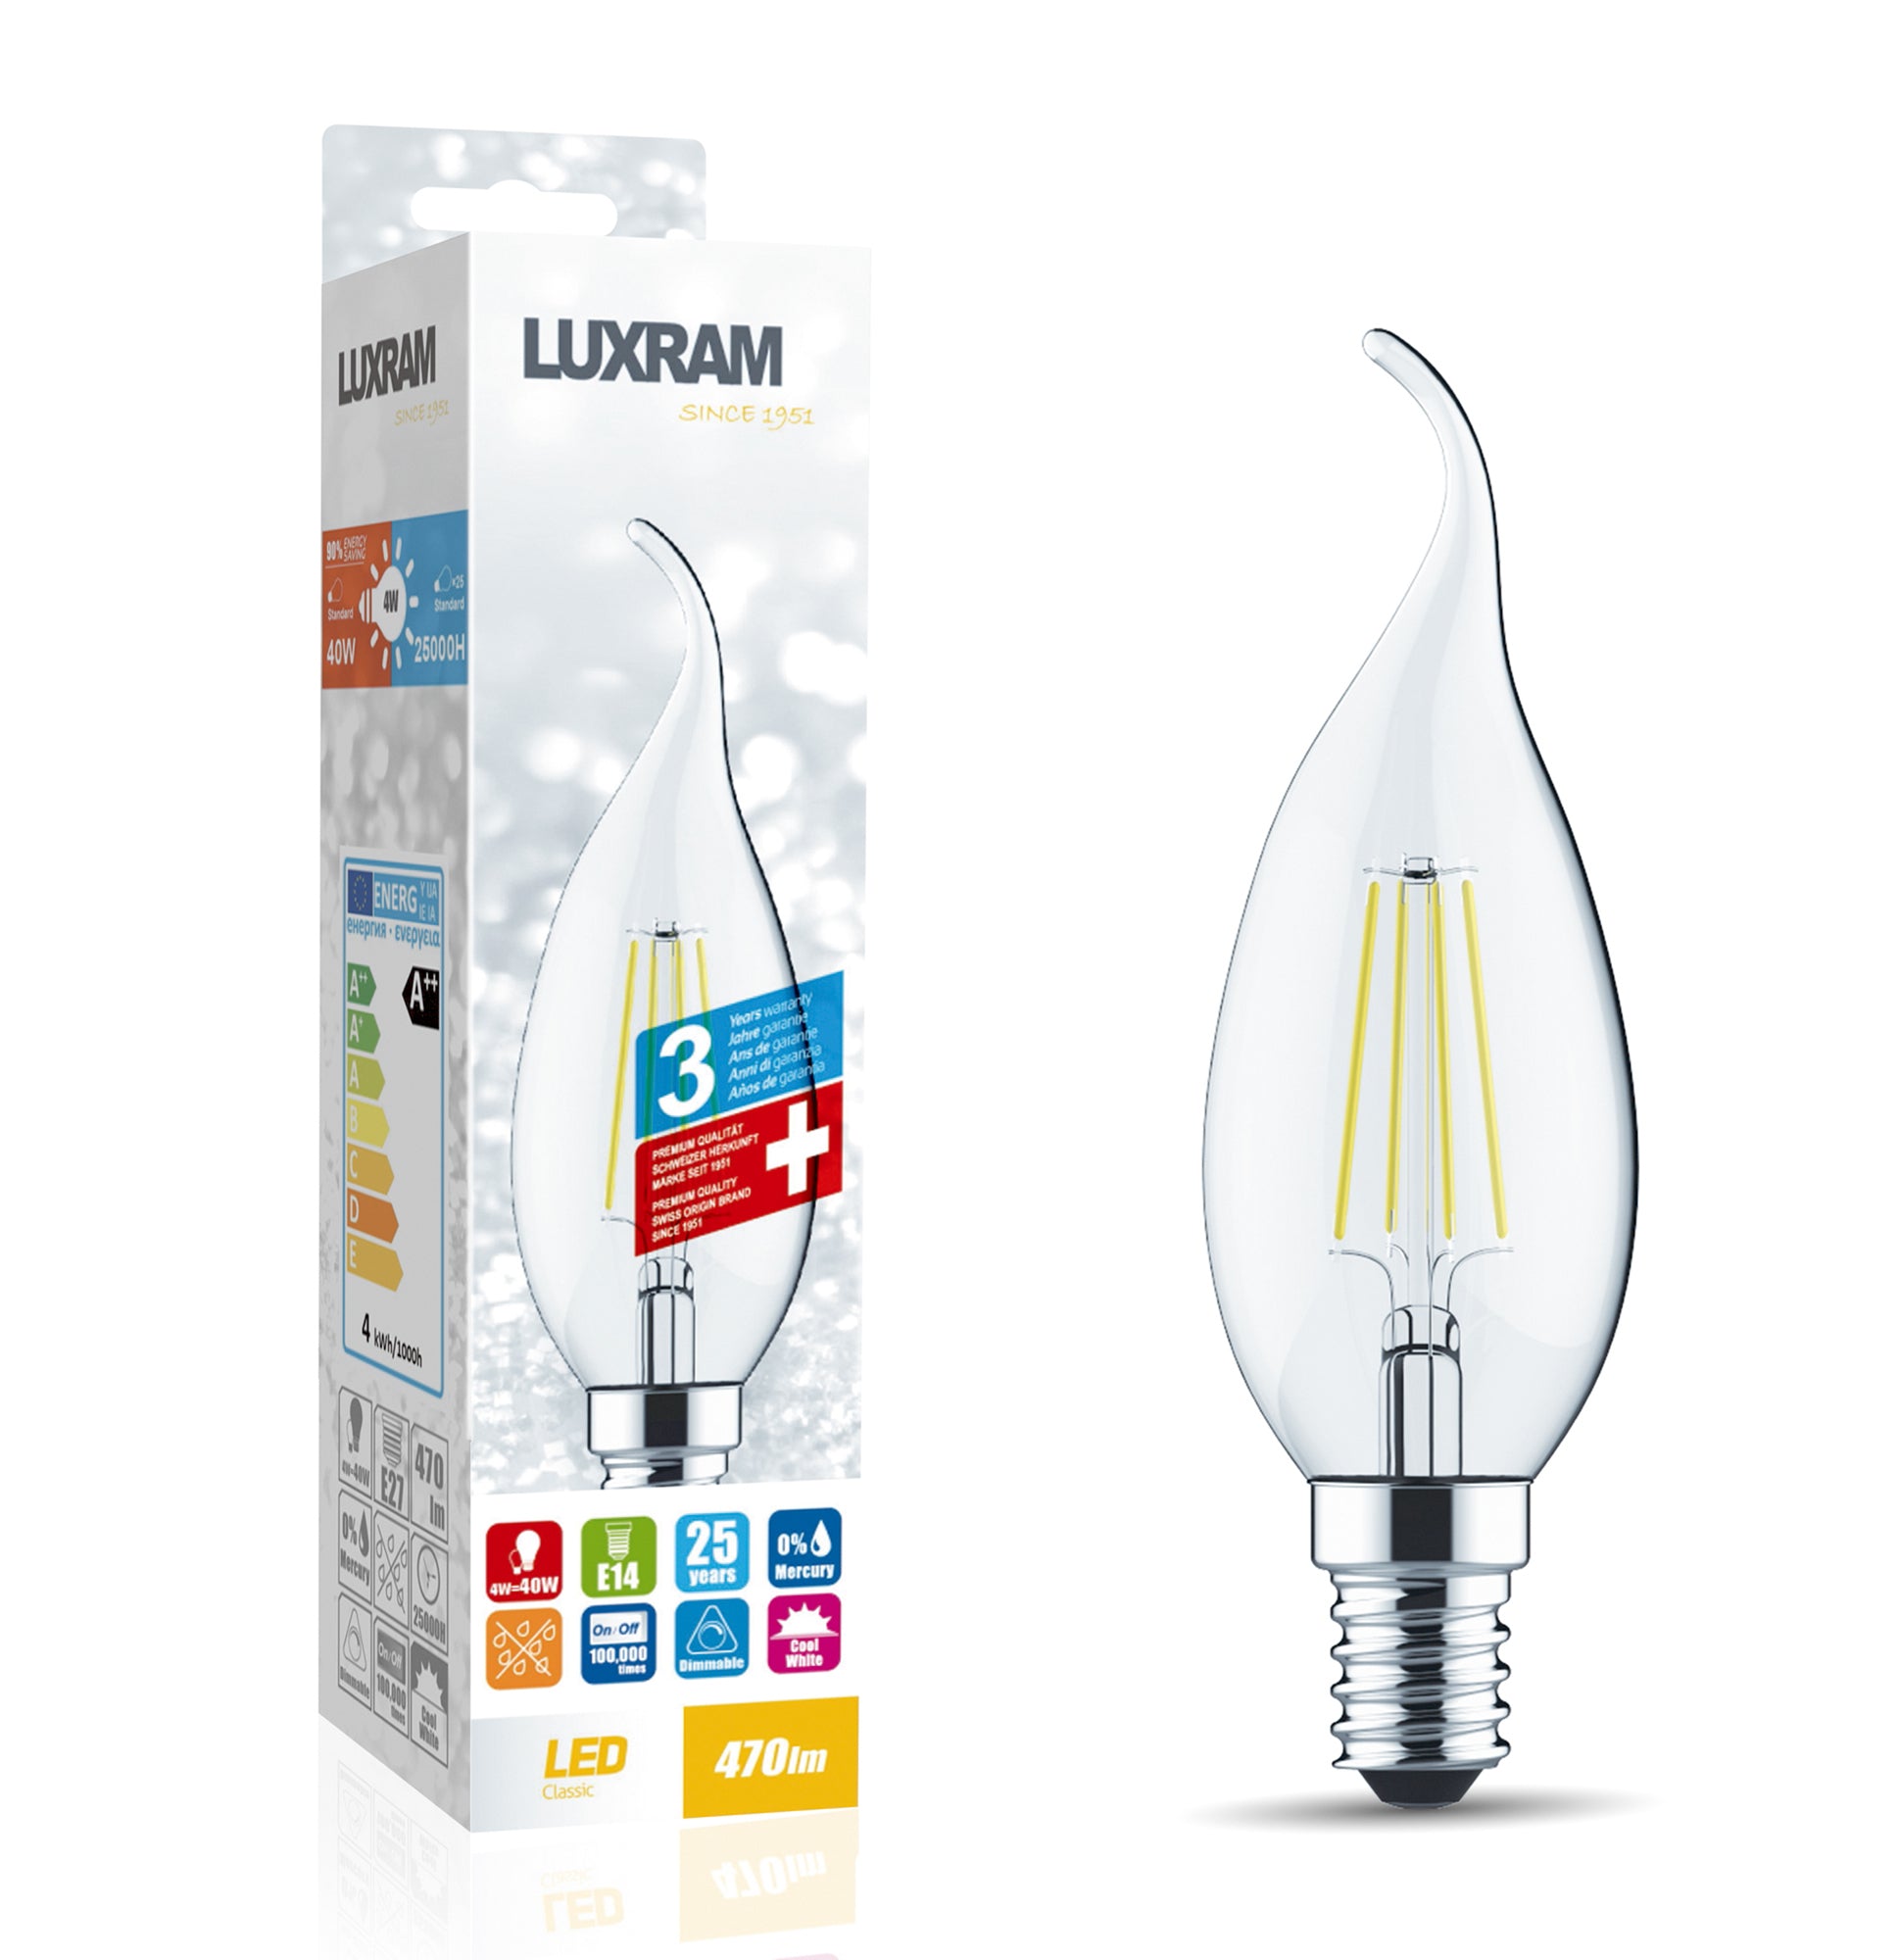 Value Classic LED Candle Tip E14 Dimmable 4W 4000K Natural White, 470l -  EMA Lighting